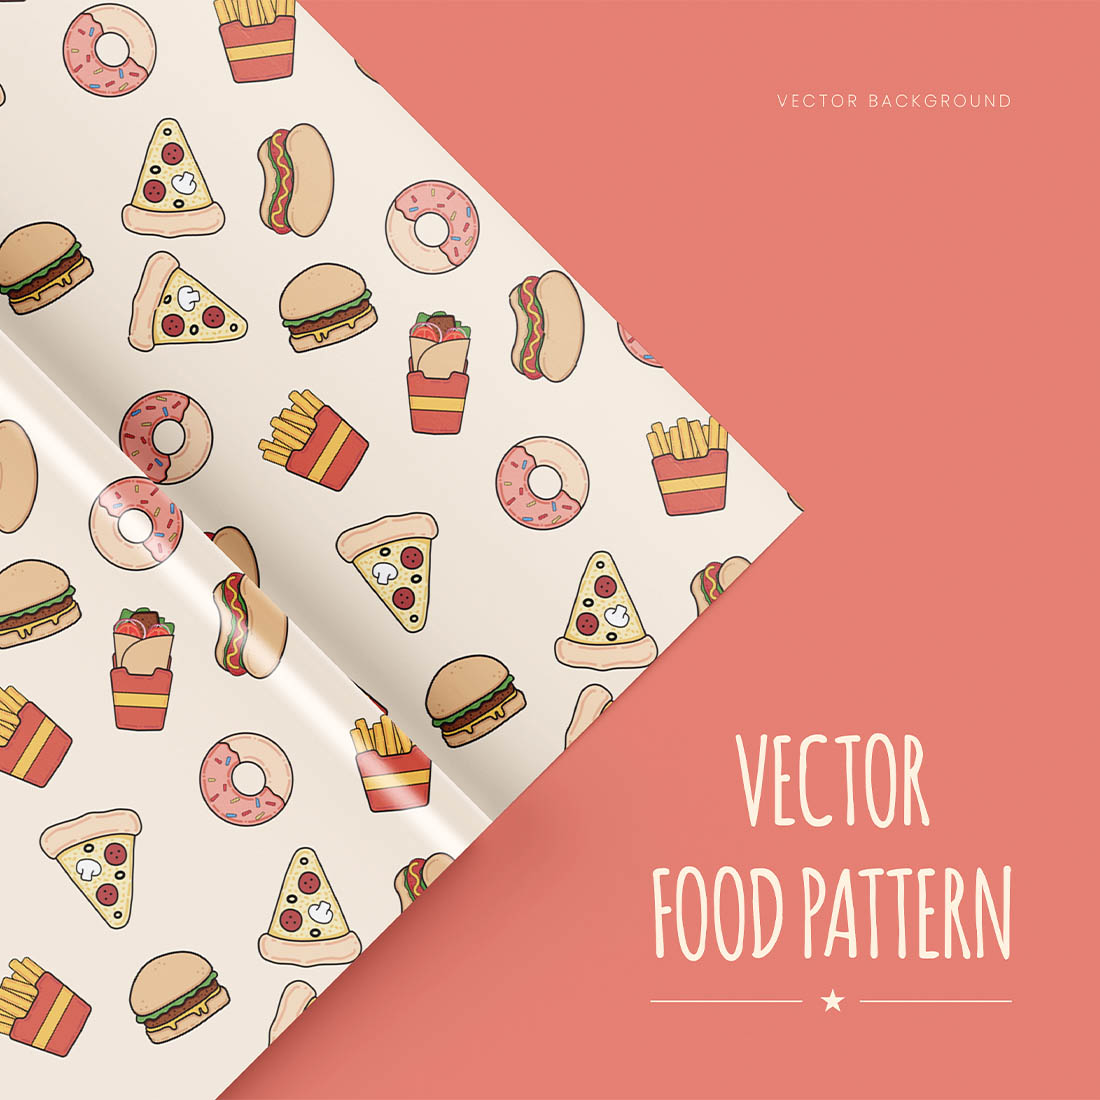 FAST FOOD PATTERN BACKGROUND cover image.